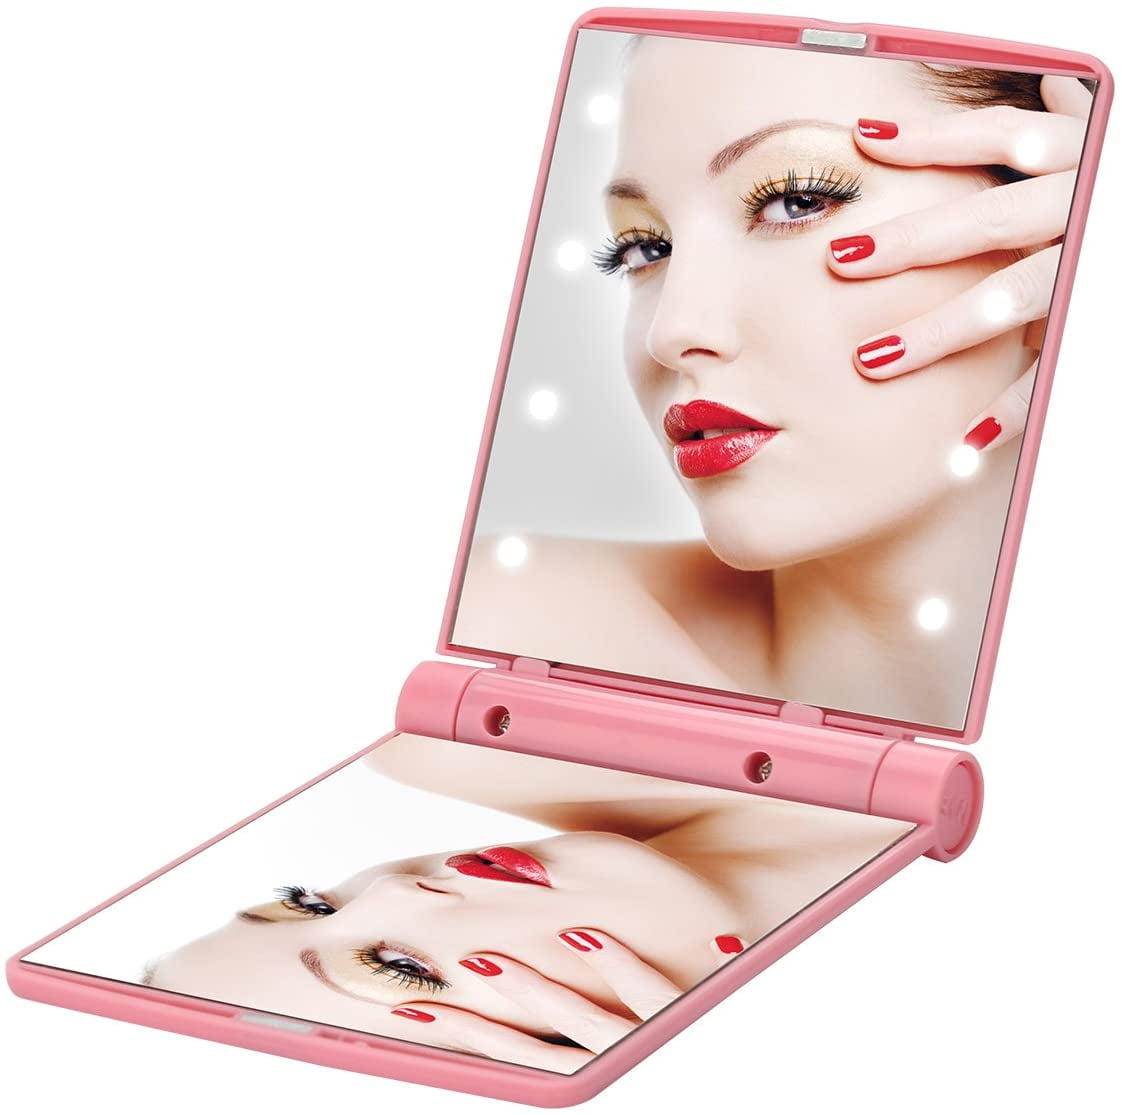 Lighted Handheld Makeup Vanity Mirror Pocket Size for Travel and Outdoor 